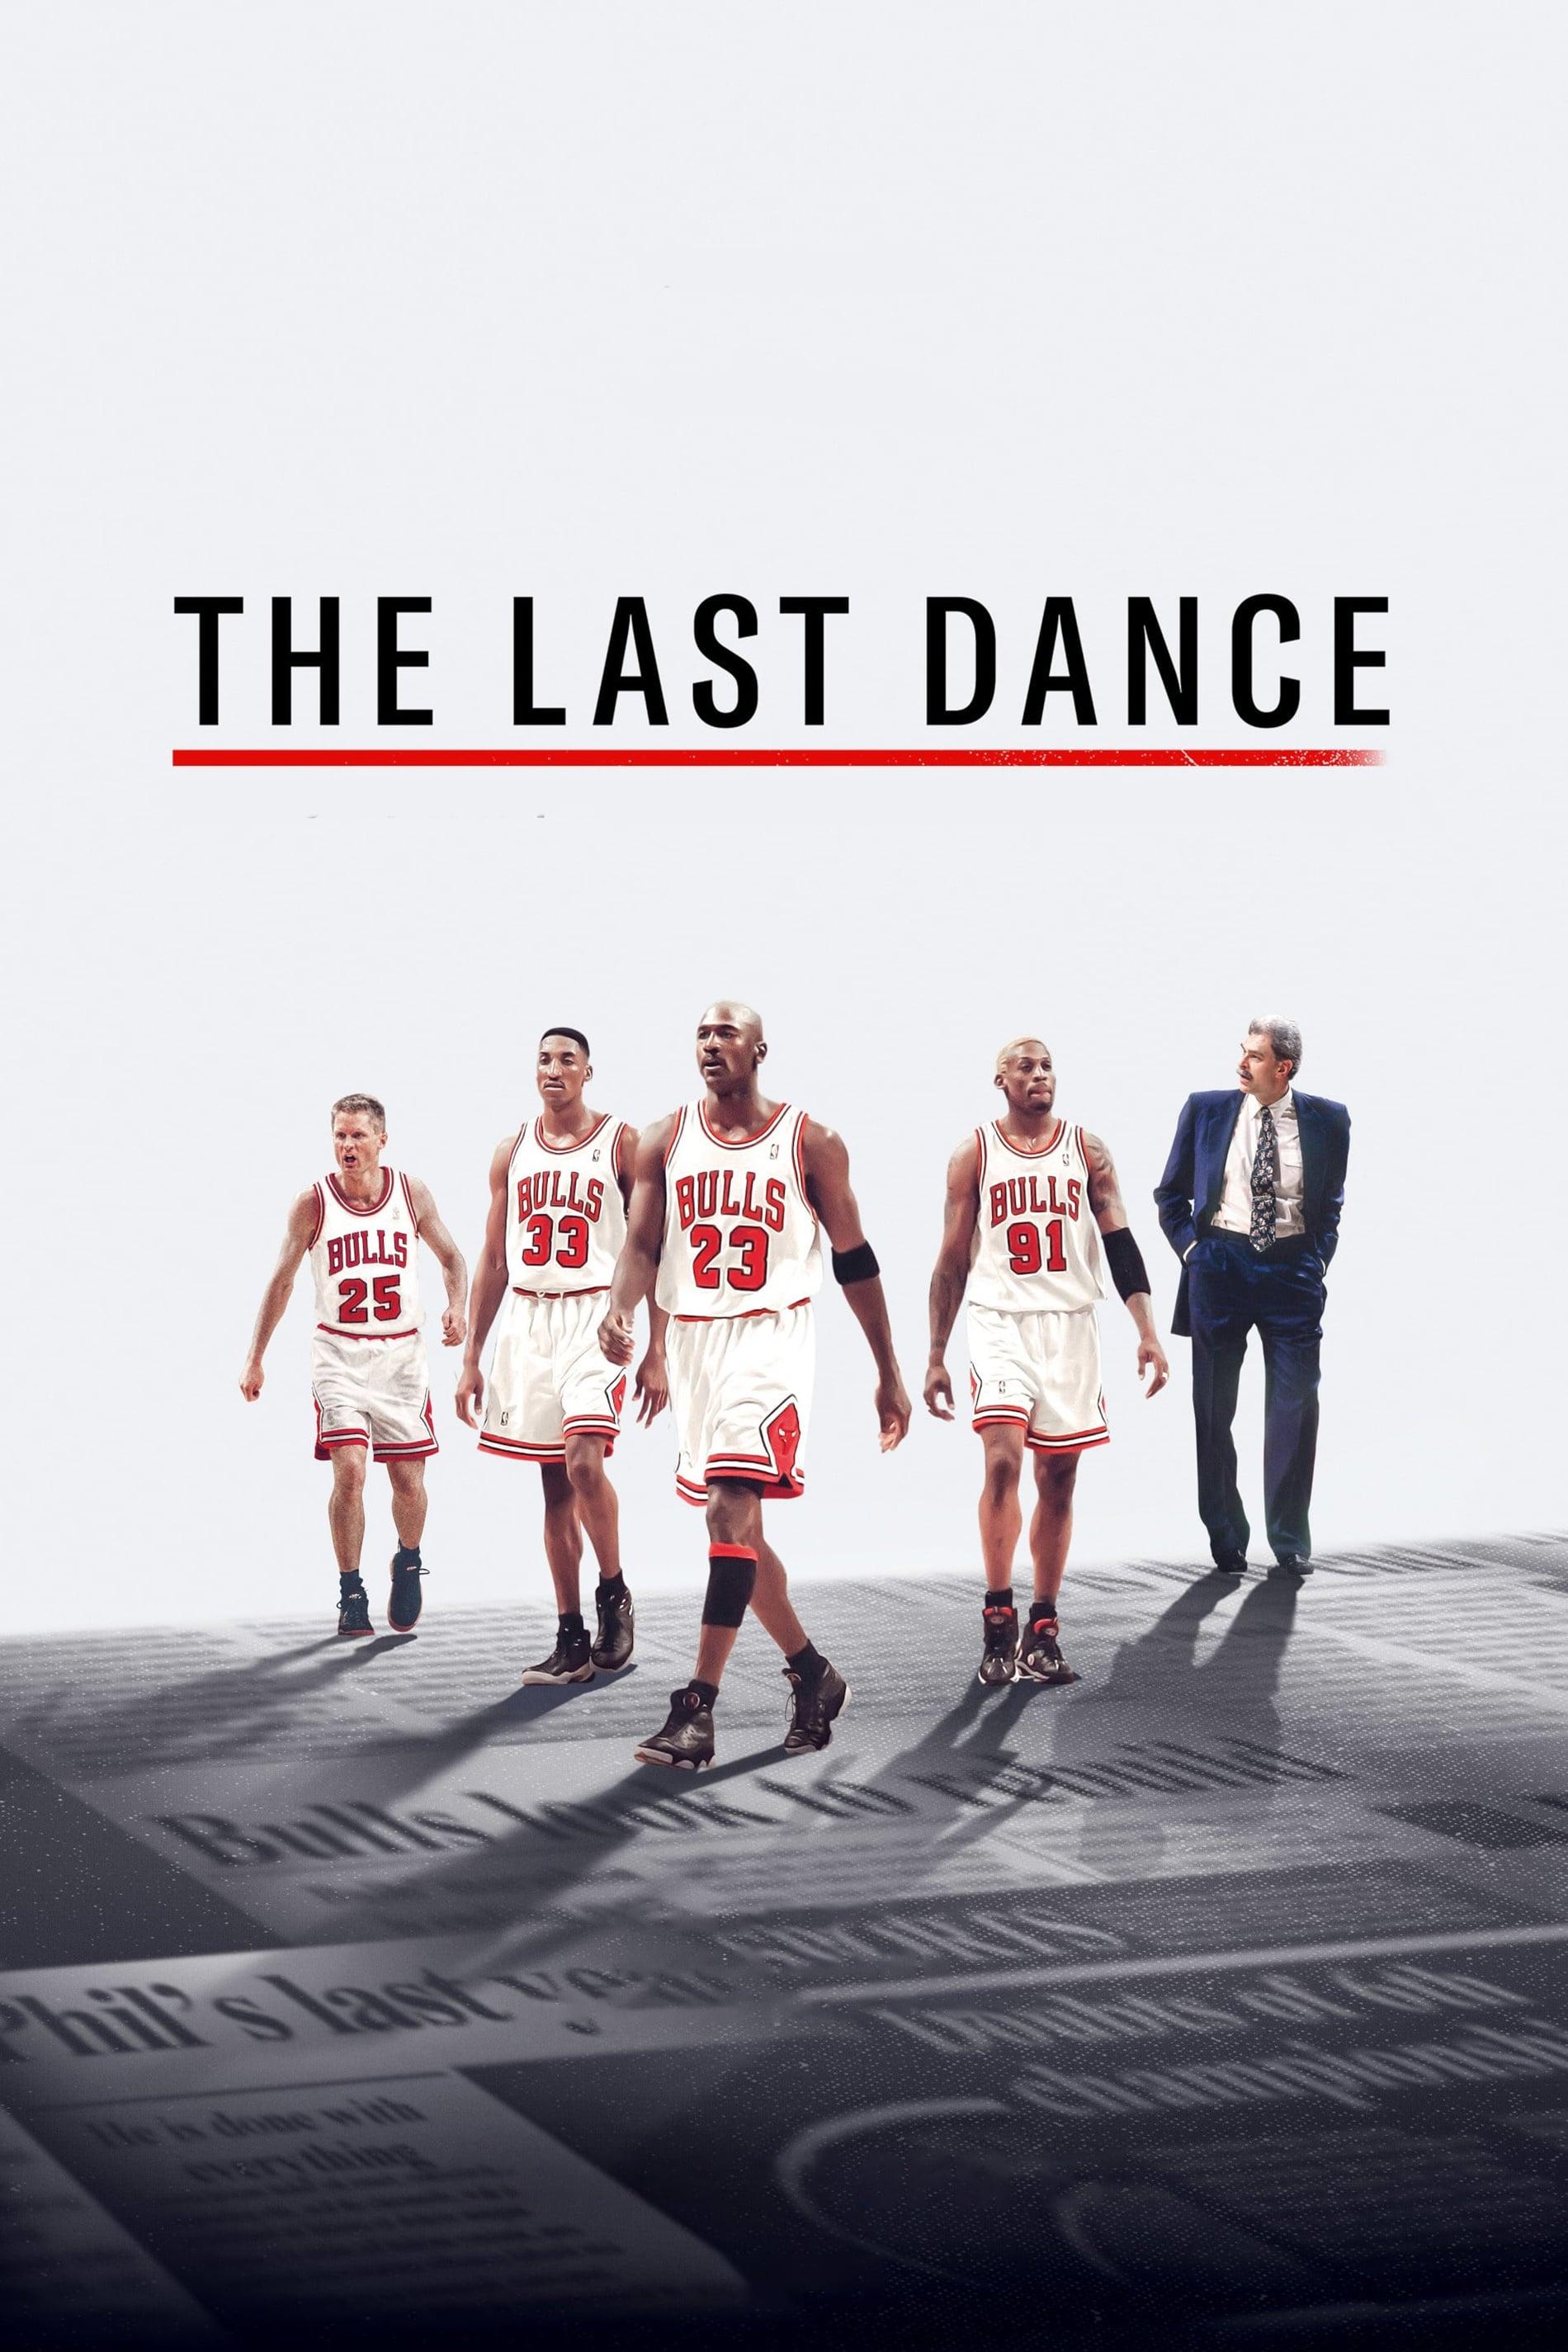 The Last Dance poster